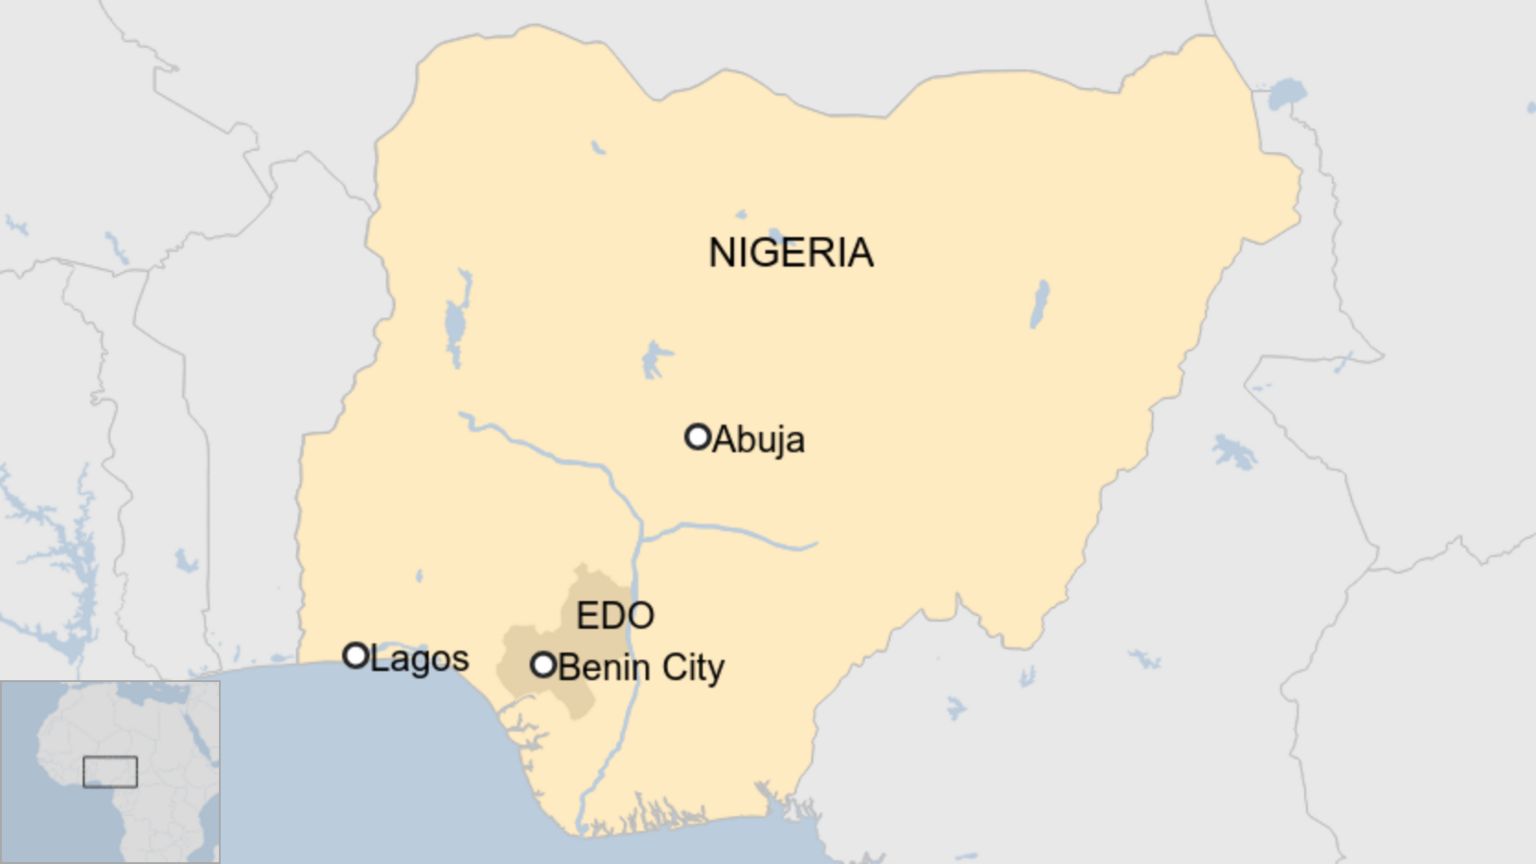 A map showing Nigeria and Benin City